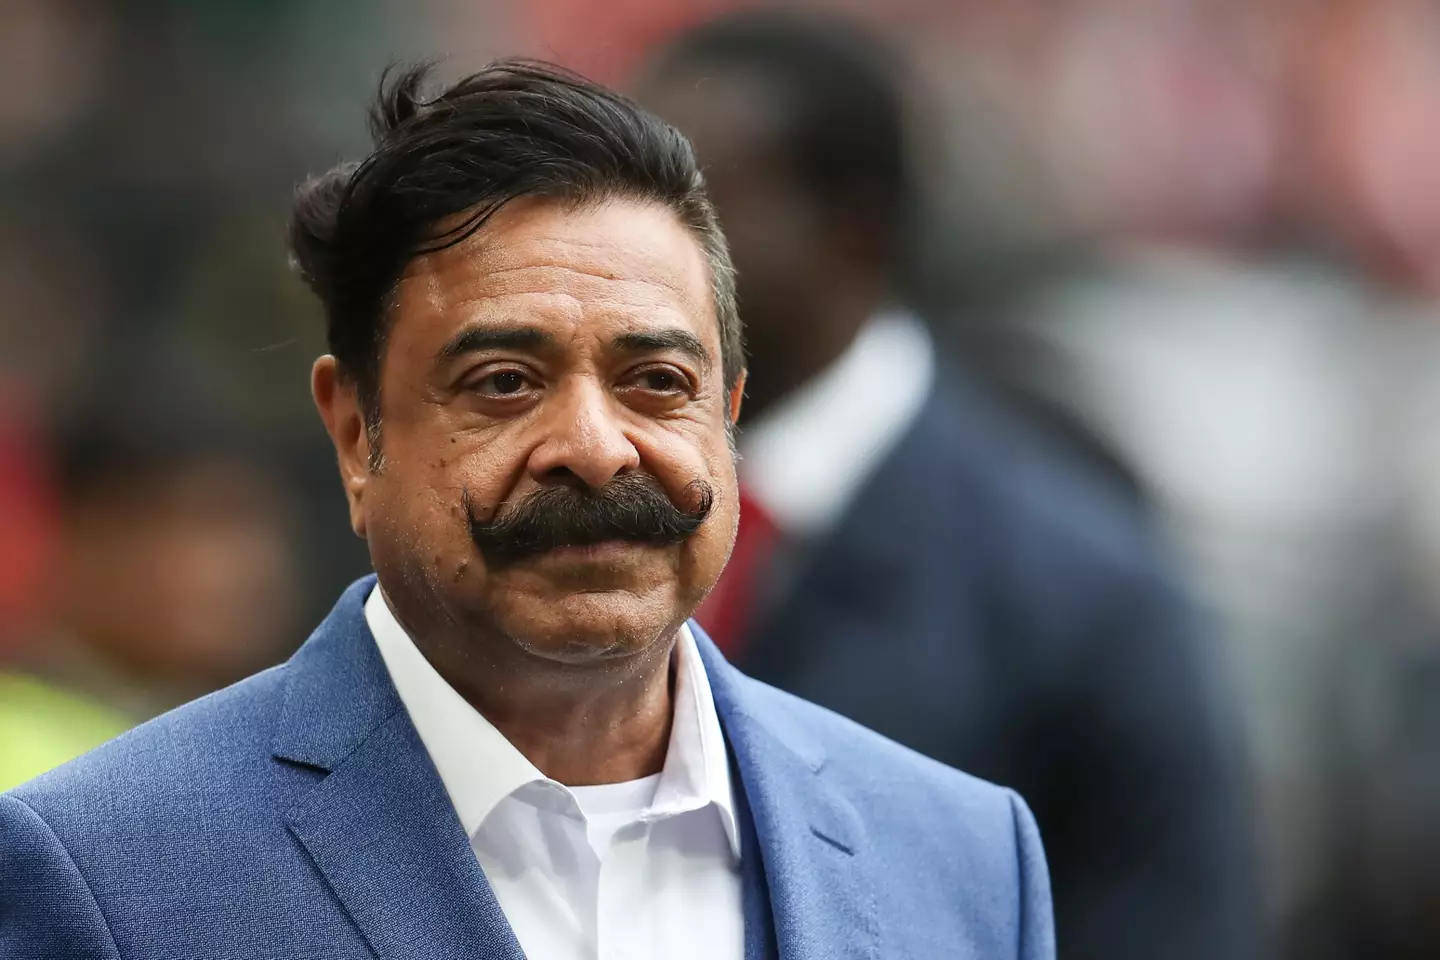 Fulham owner Shahid Khan. (Image credit: PA Images)